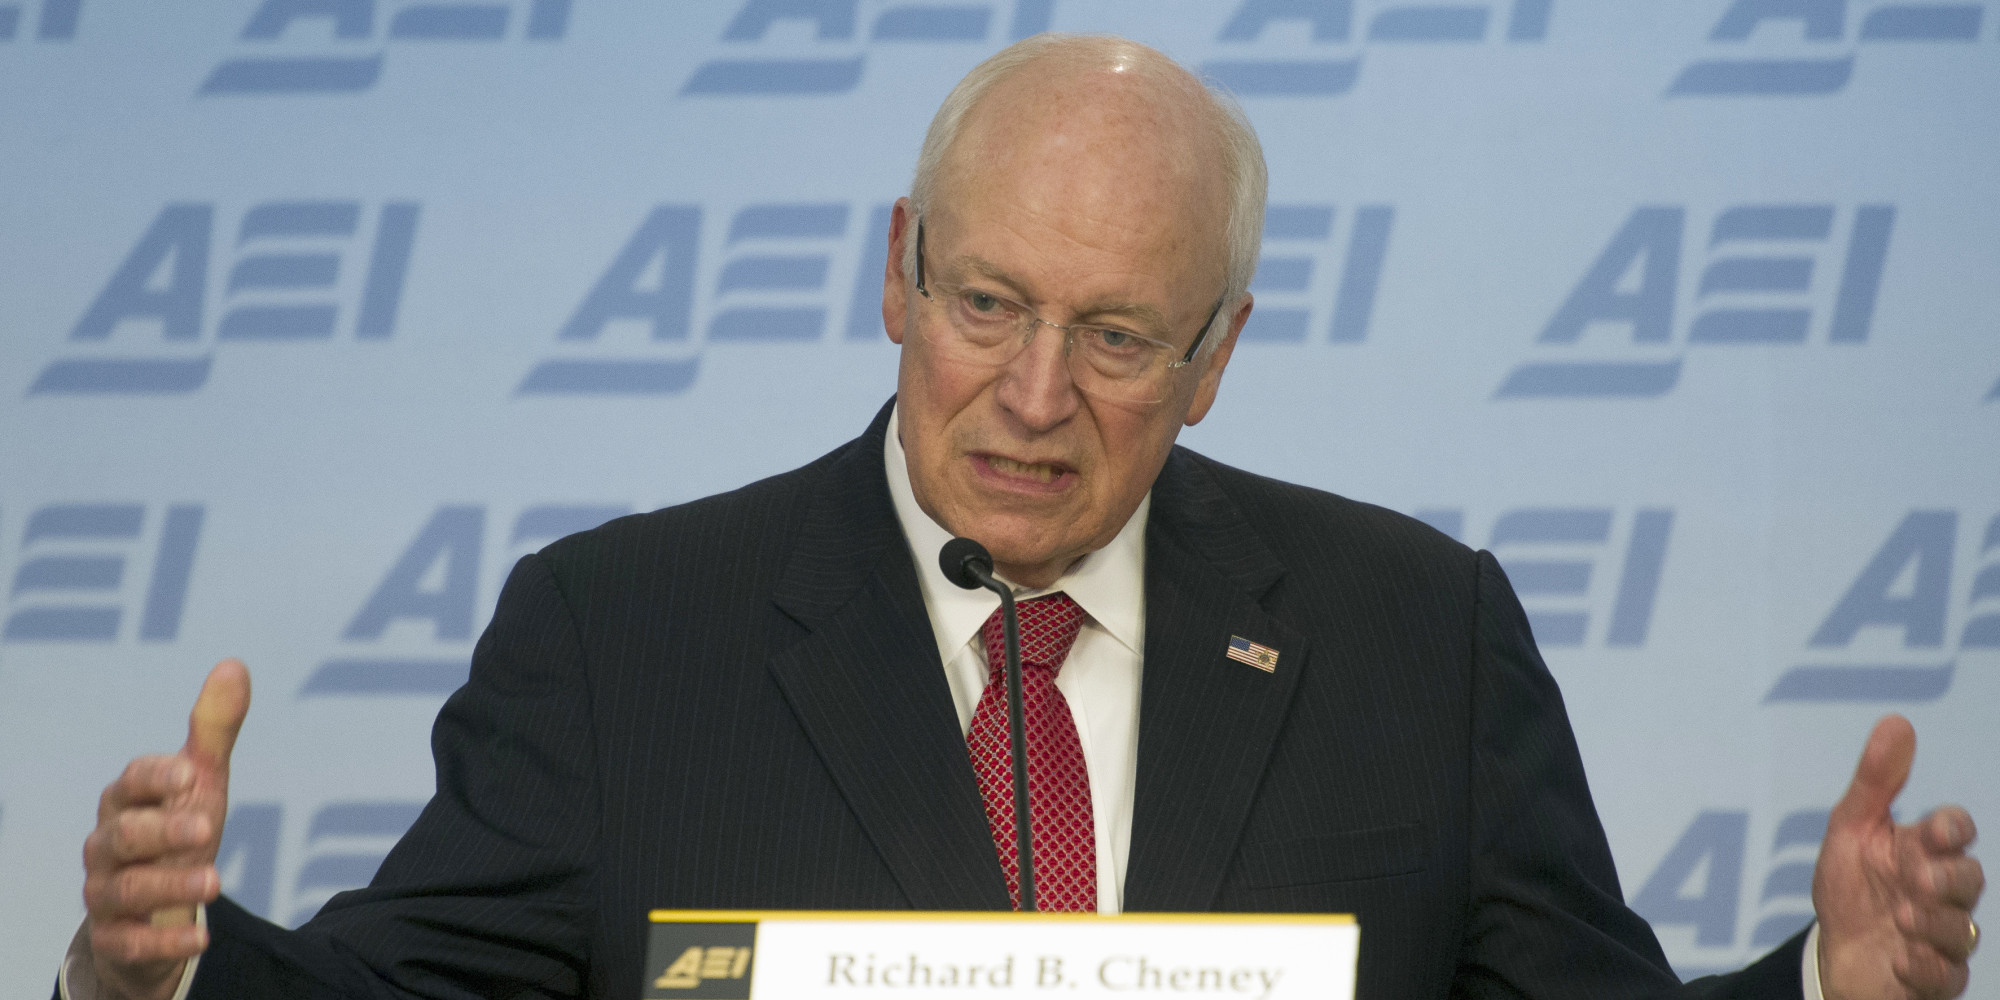 Dick cheney supports gay rights